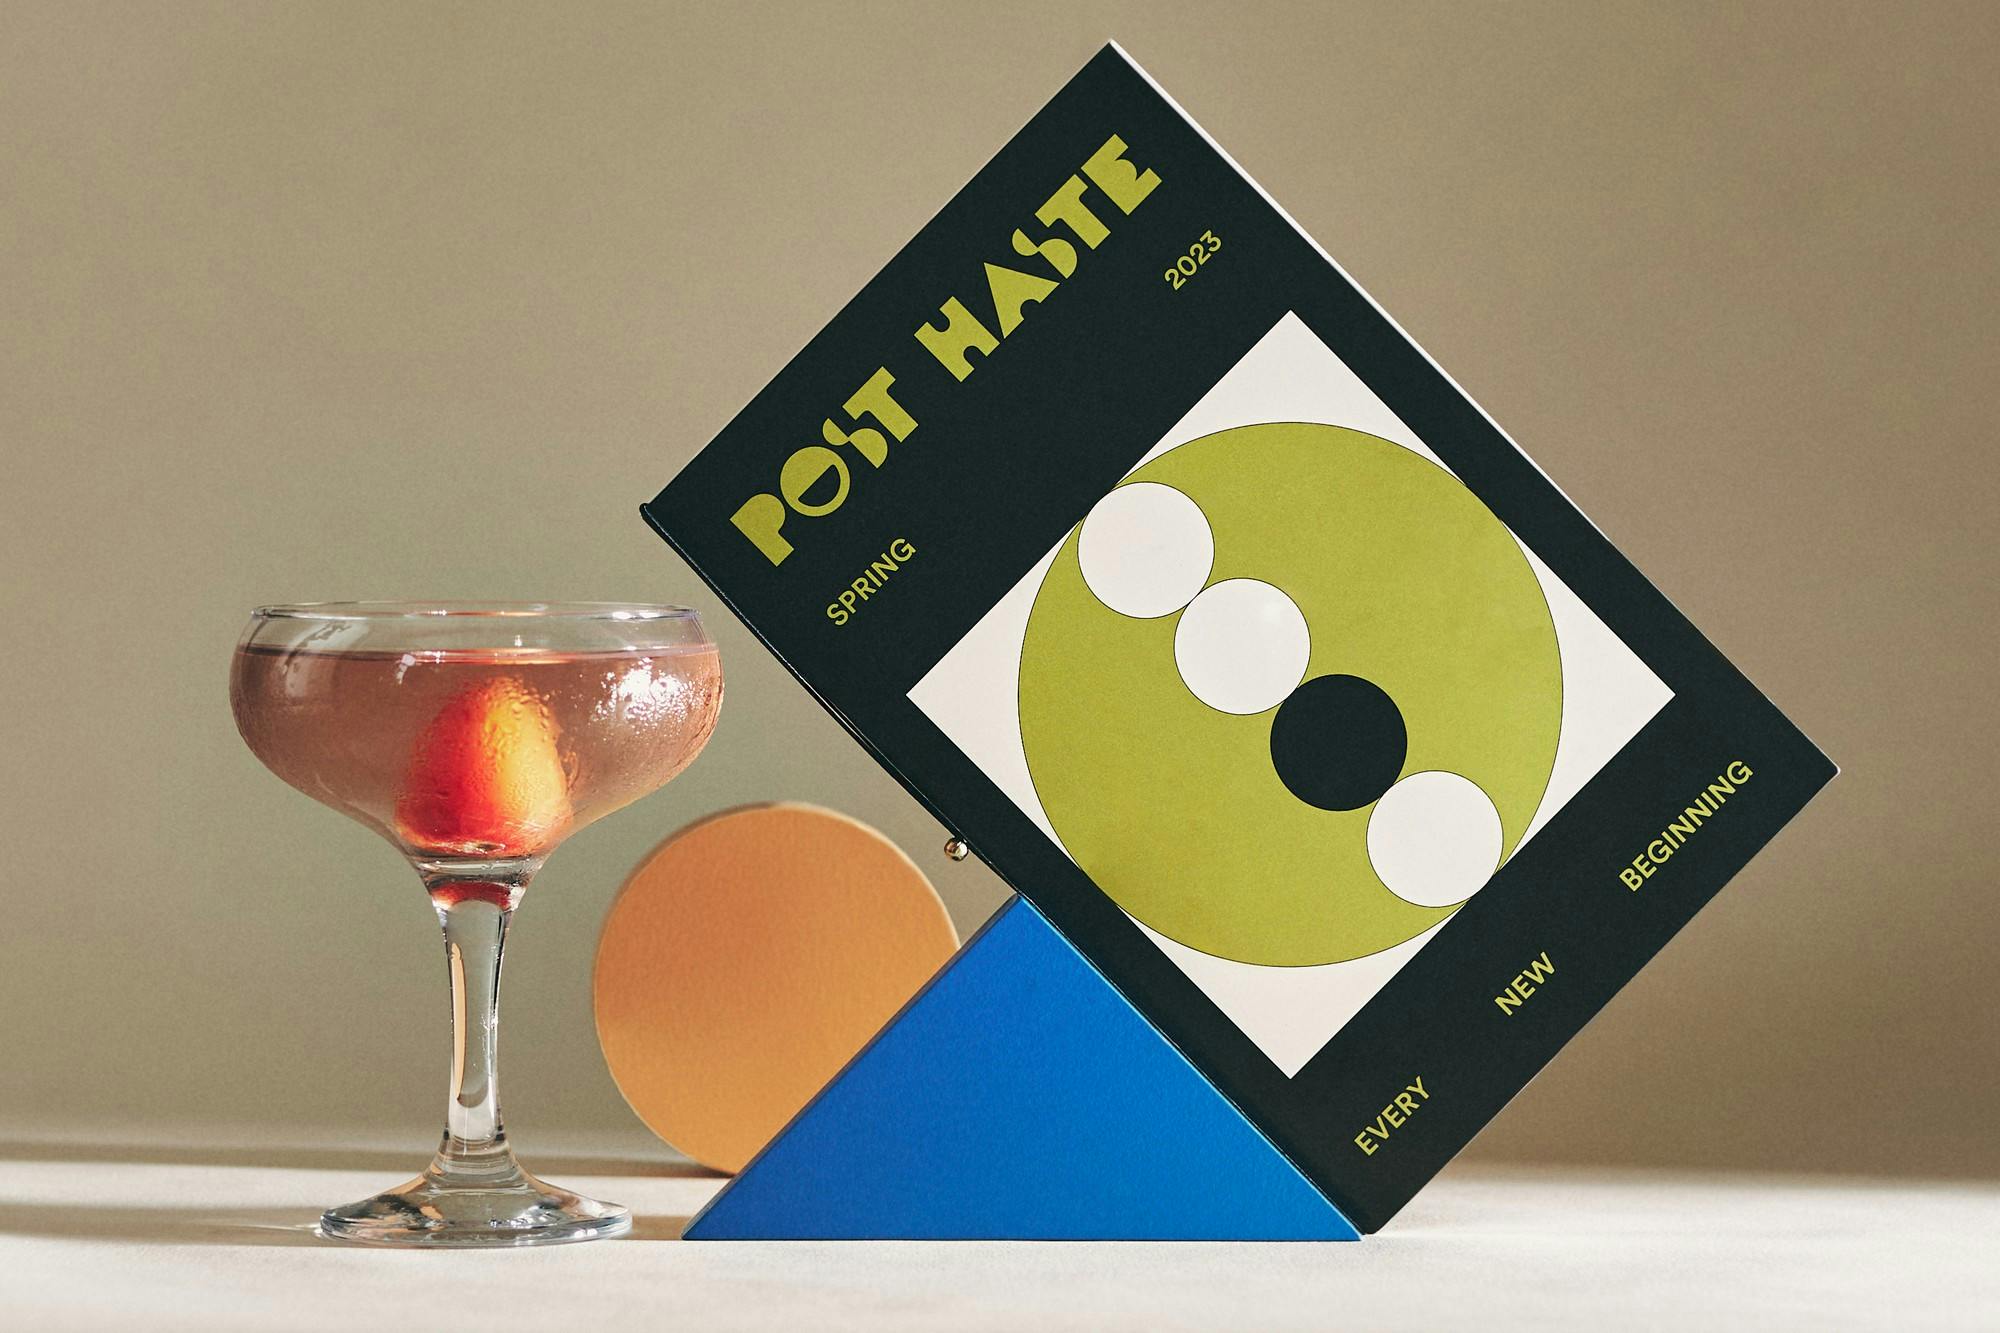 Post Haste Cocktail Bar Branding featured image